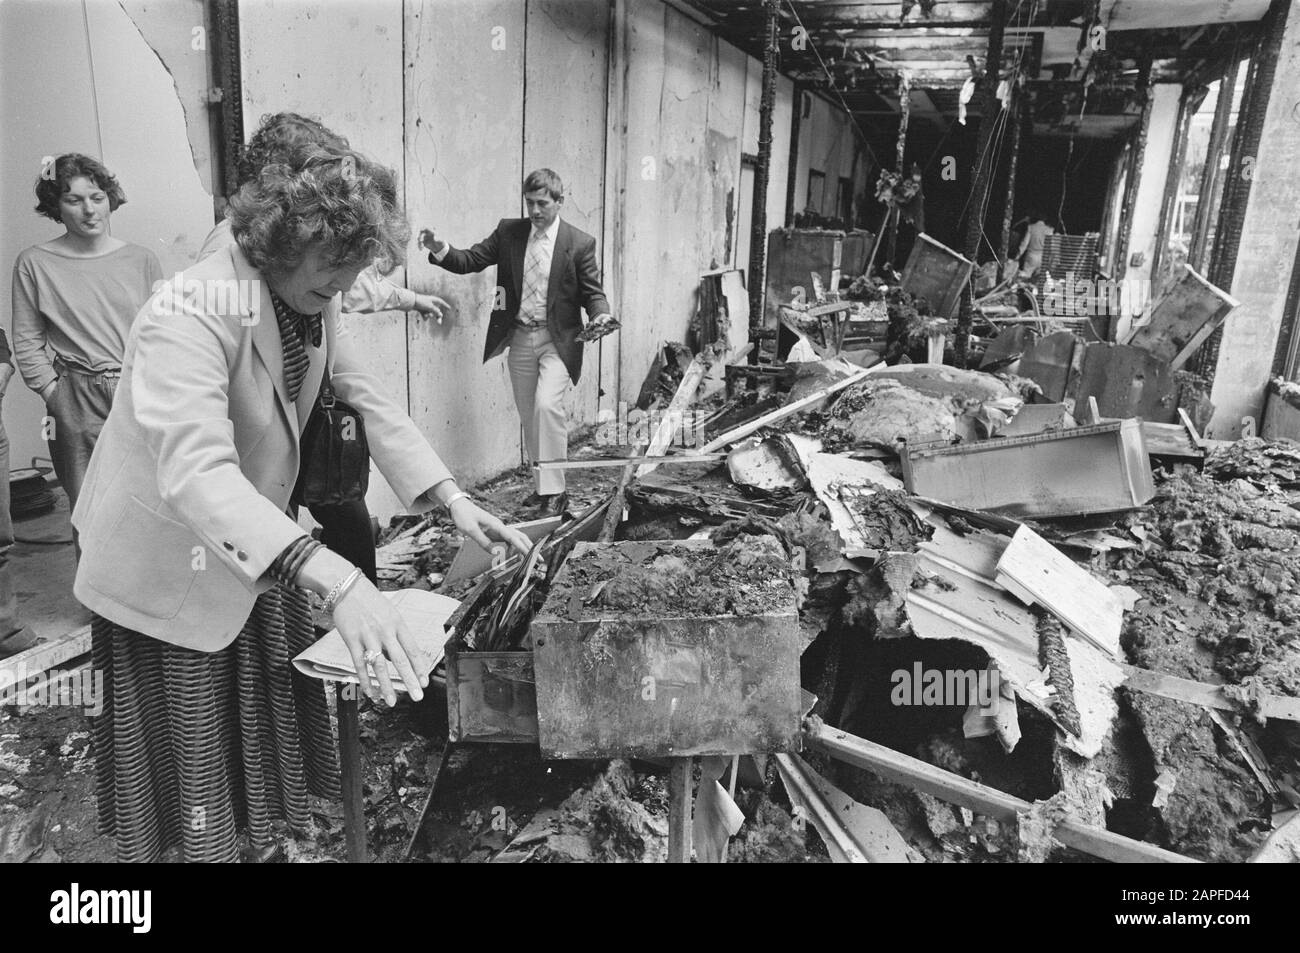 Arson at Herhuisvesting in Amsterdam; officials search files Date: July 6, 1984 Location: Amsterdam, Noord-Holland Keywords: OFFICIALS, DOSES, fires Stock Photo